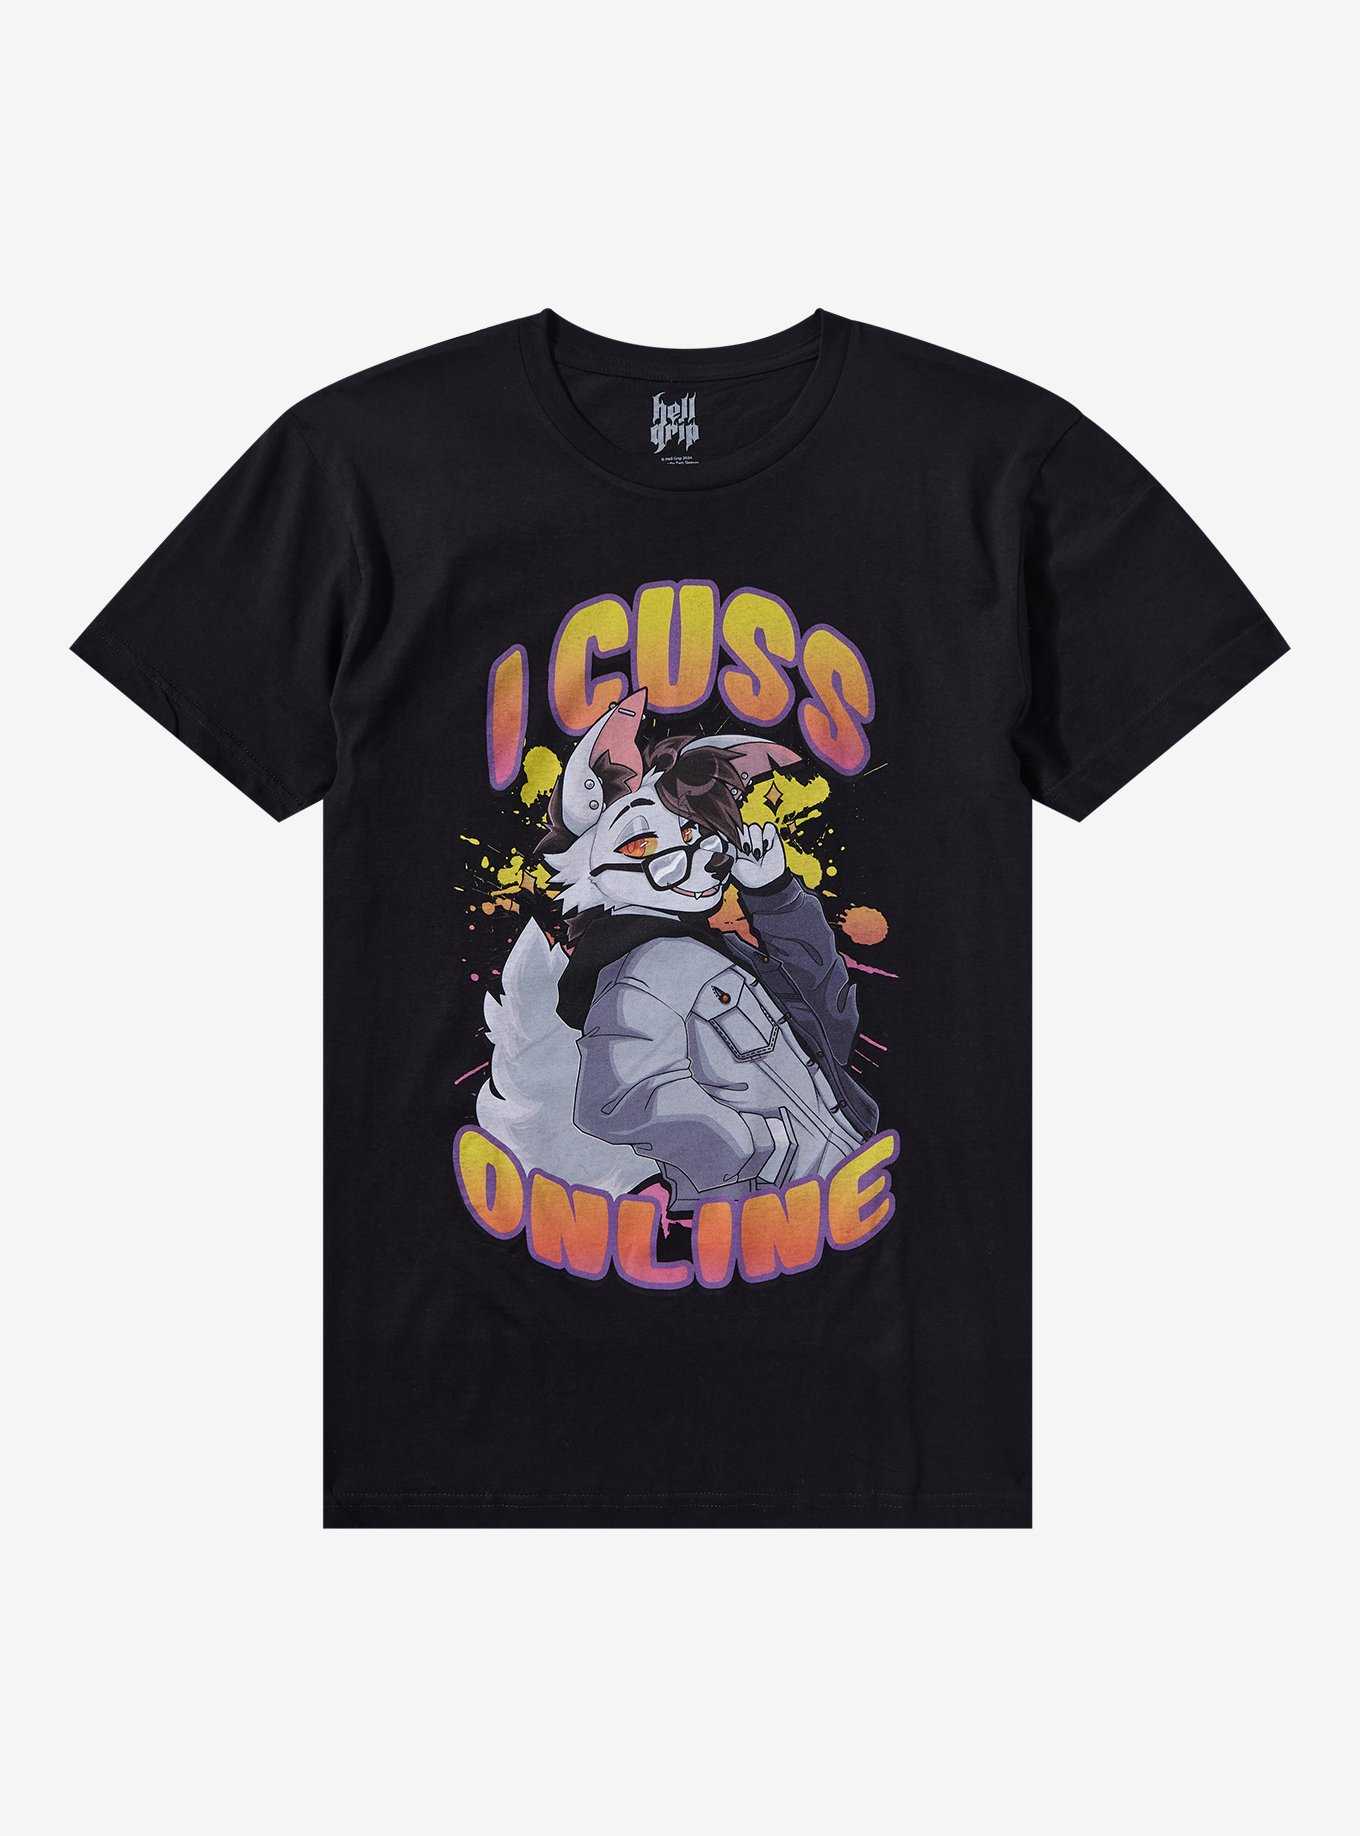 I Cuss Online T-Shirt By Hell Grip, , hi-res